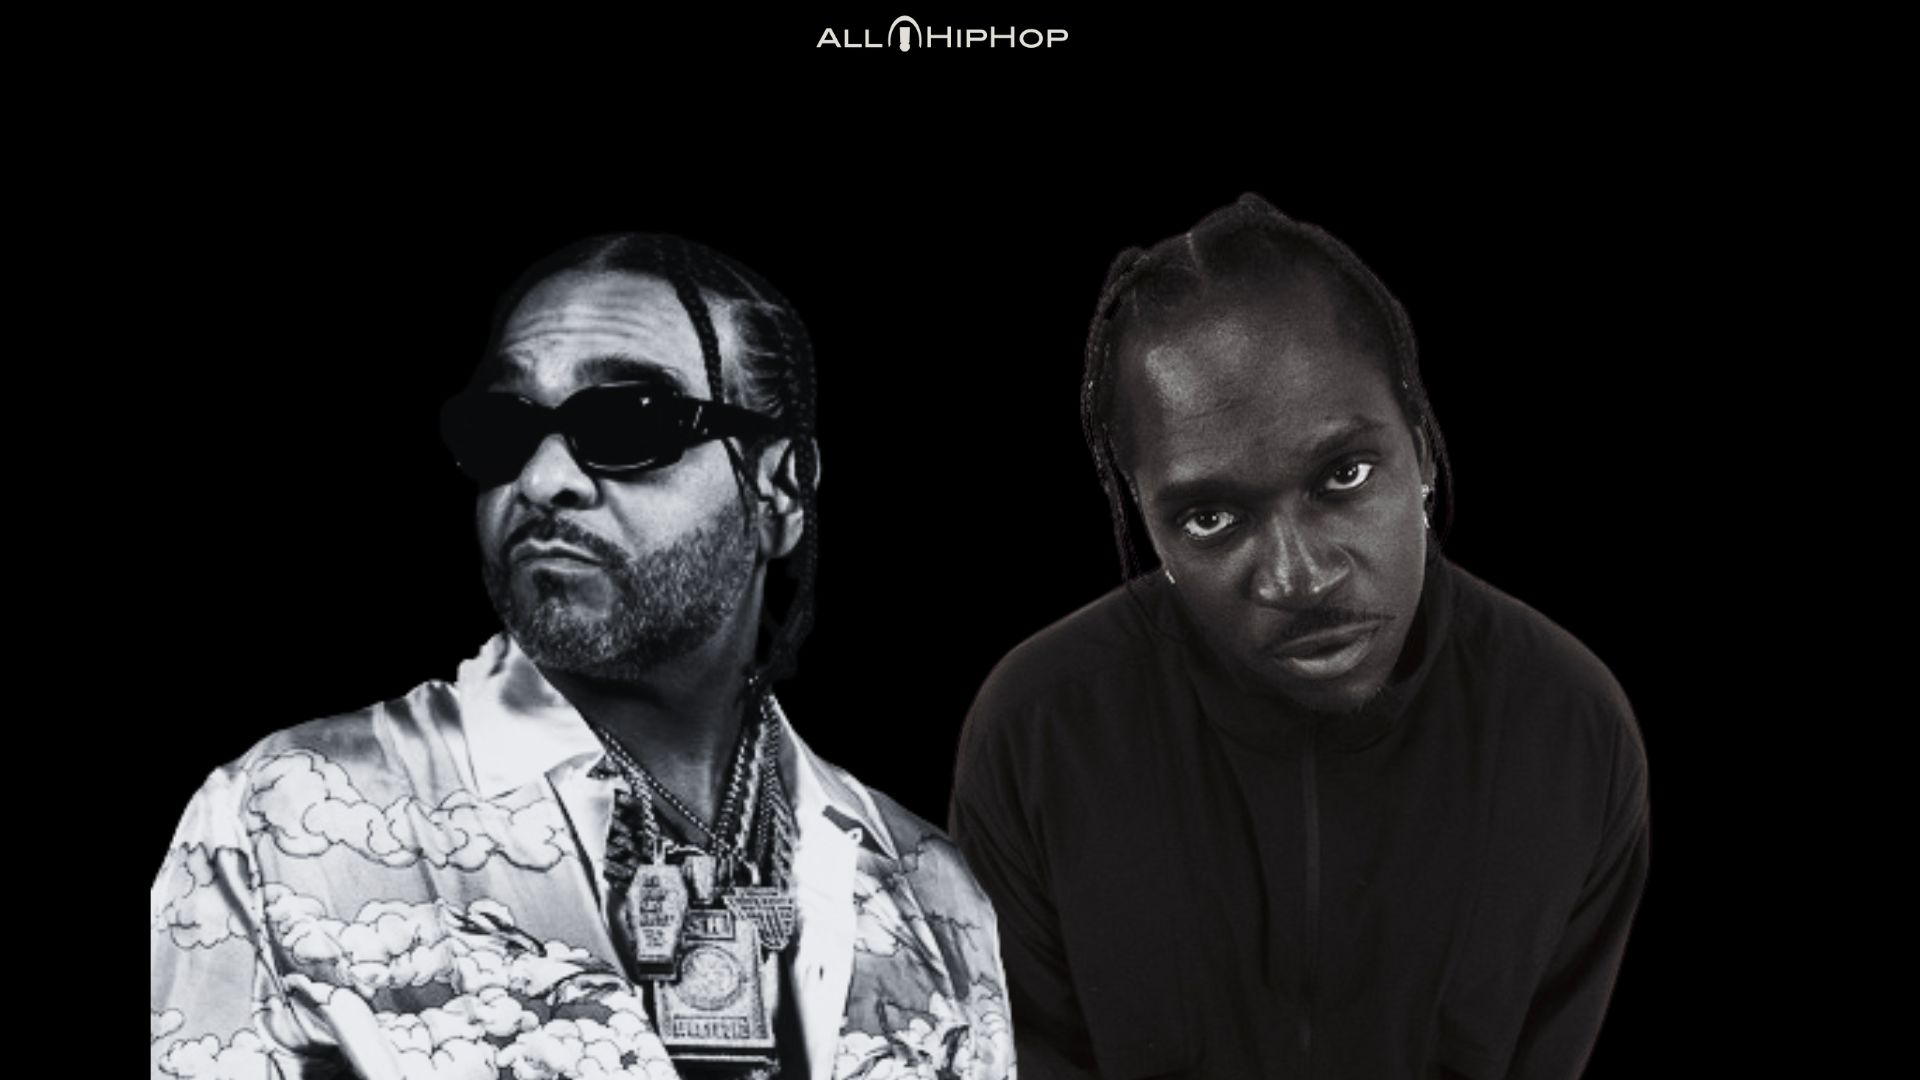 Pusha T & Jim Jones Beef Builds After Diss Track Premieres During